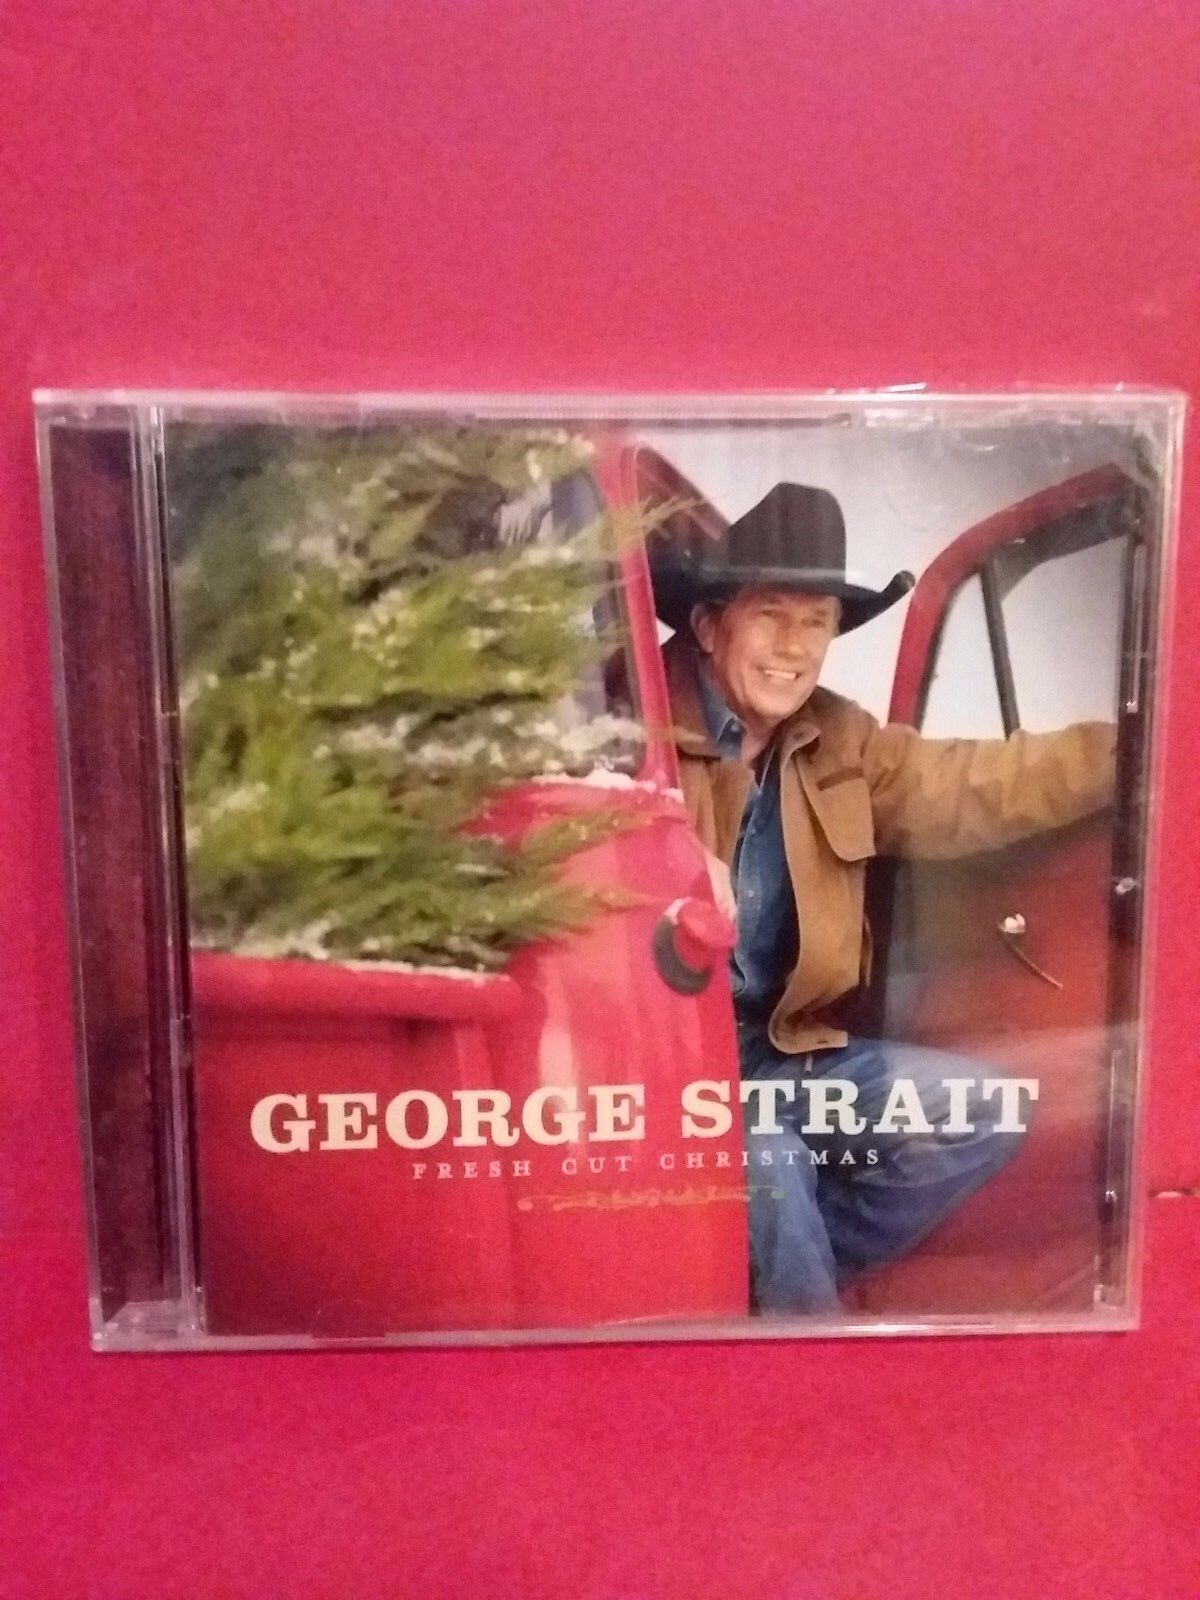 CD George Strait Fresh Cut Christmas New and sealed